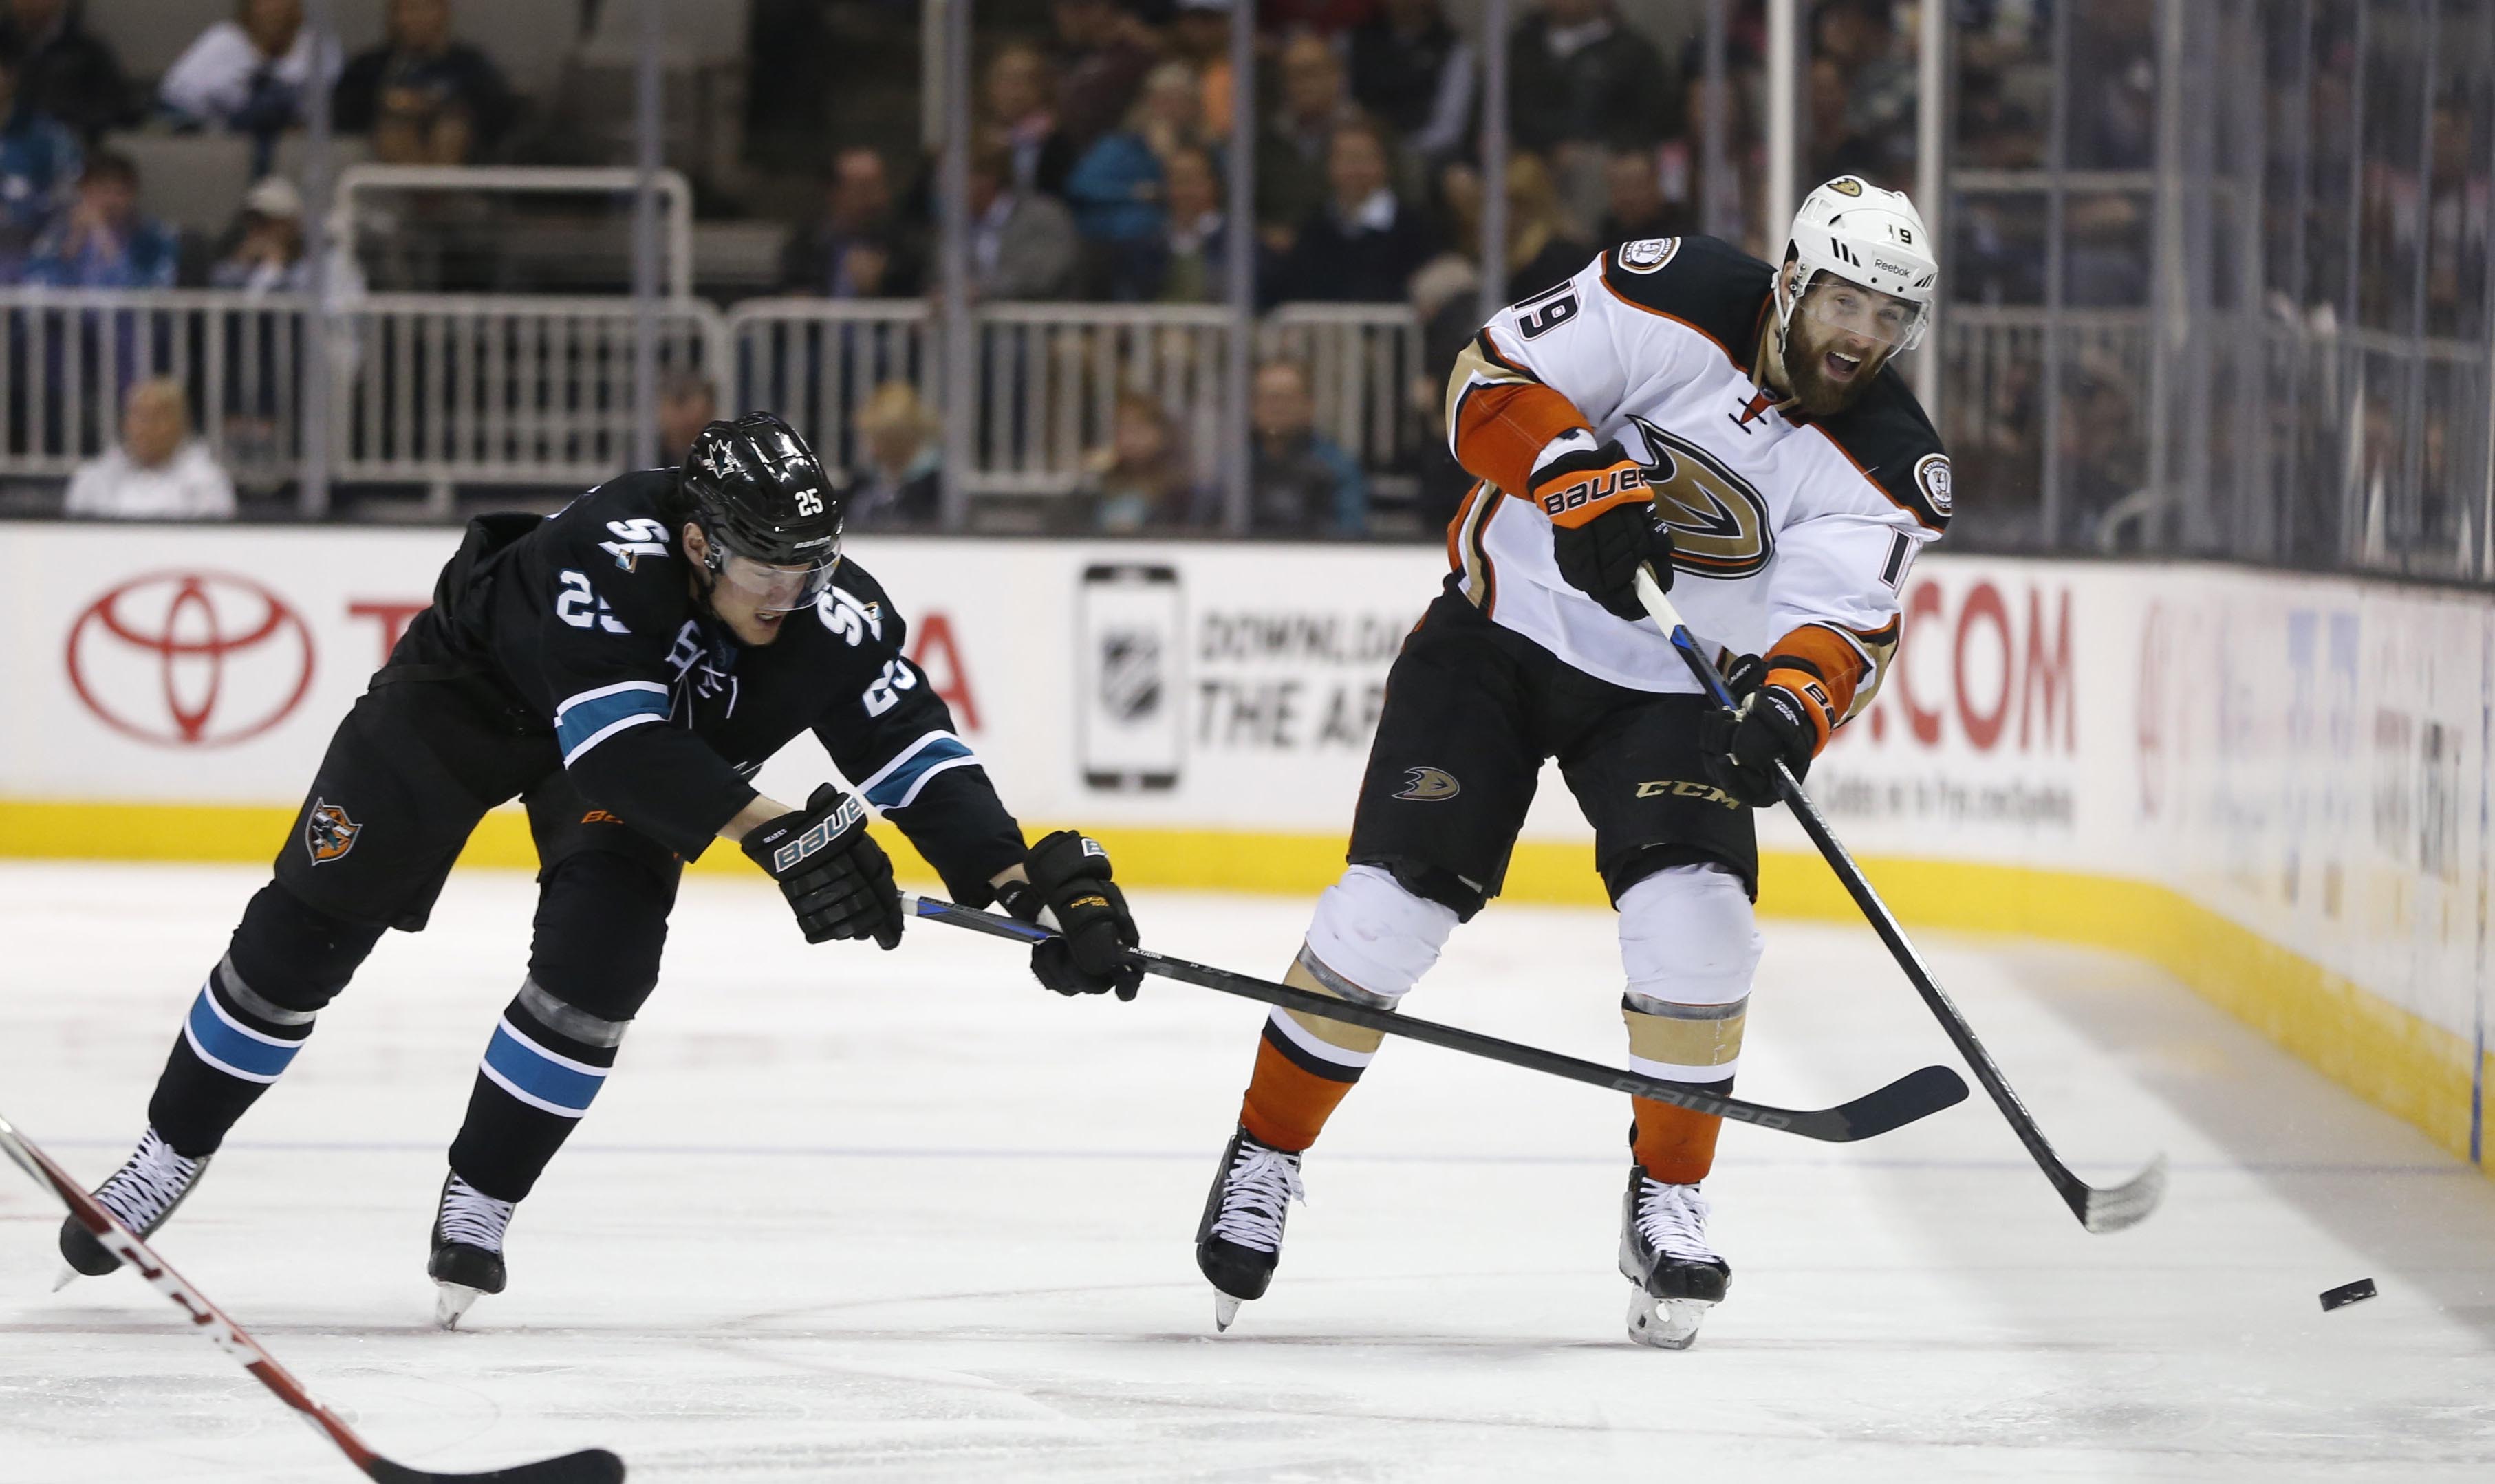 Patrick Maroon chips the puck in last season against the Sharks.